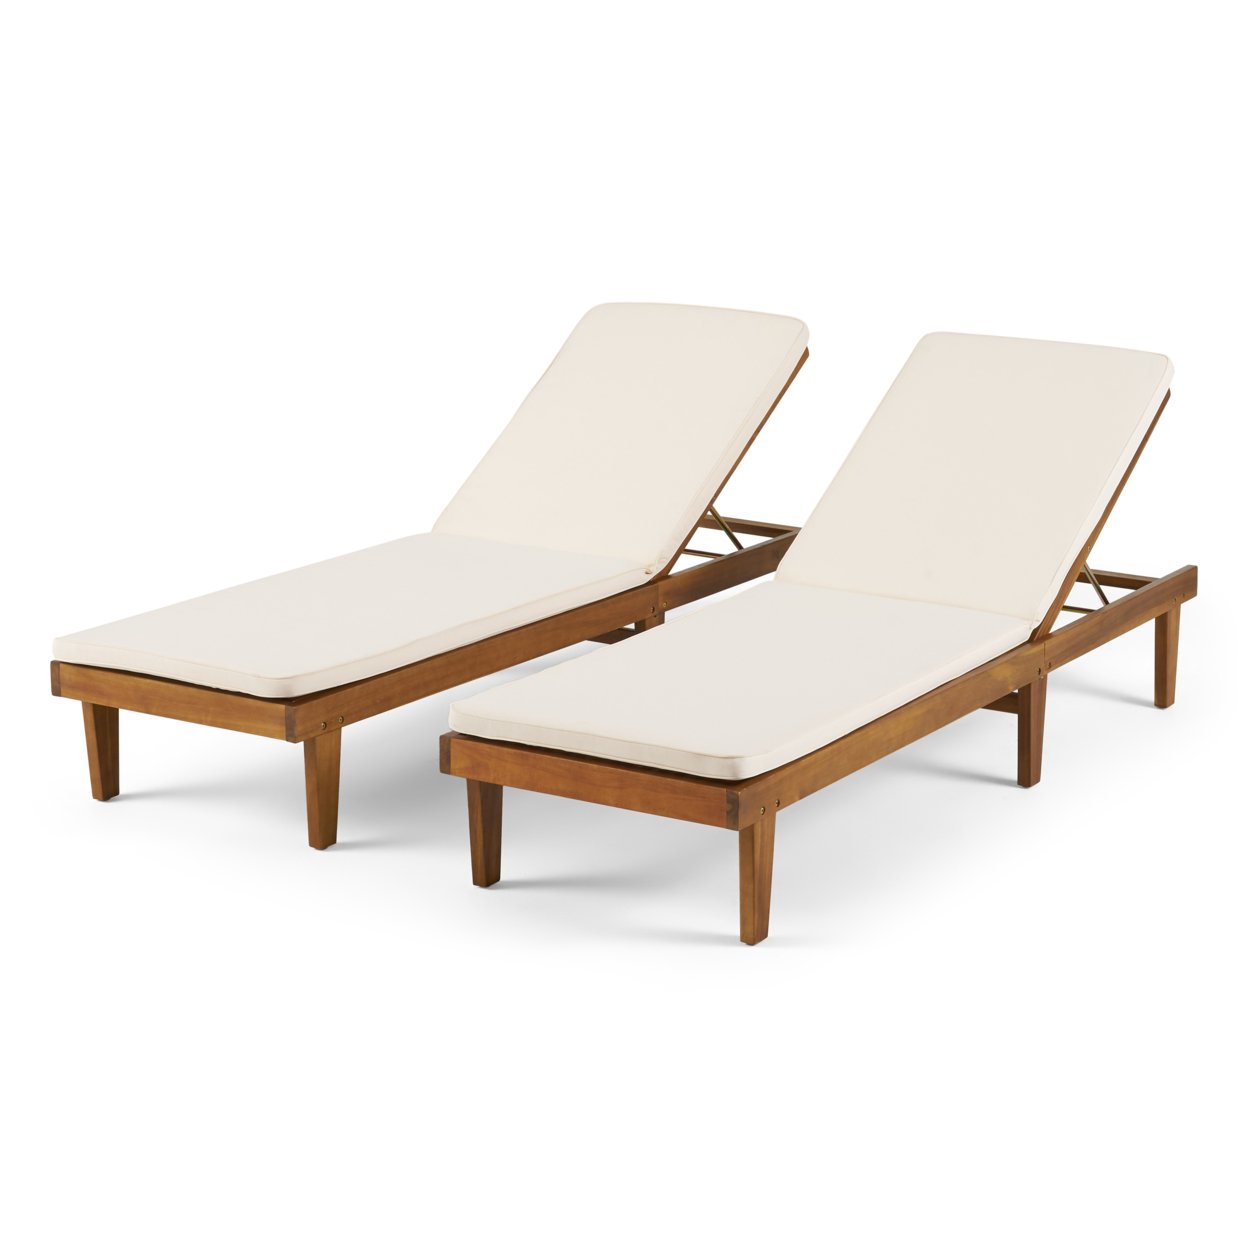 Madge Oudoor Modern Acacia Wood Chaise Lounge With Cushion (Set Of 2) - Teak Finish + Dark Gray